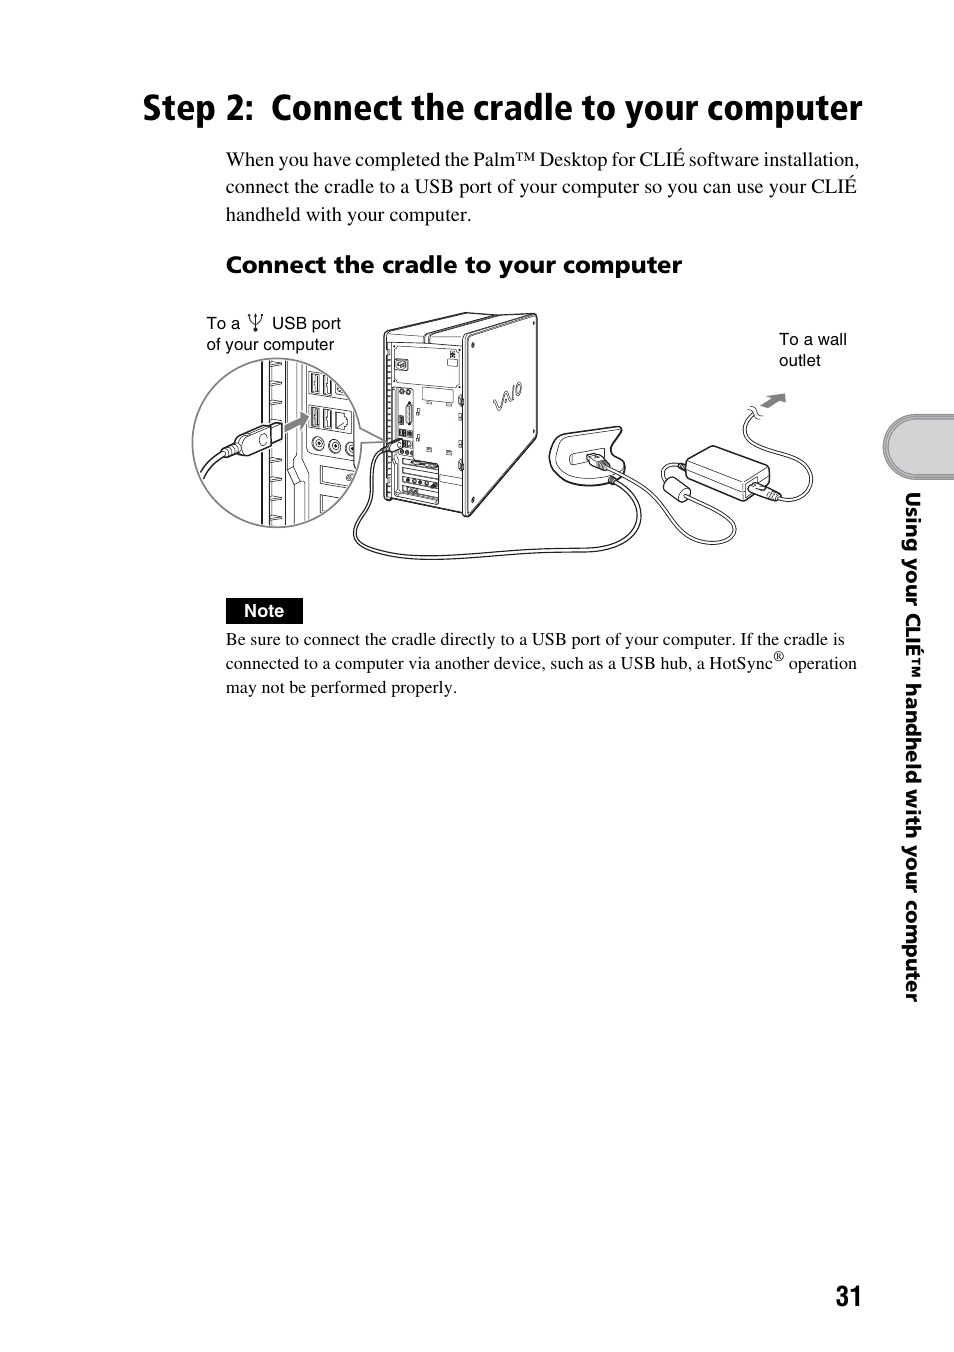 Step 2: connect the cradle to your computer, Connect the cradle, To your computer | Sony PEG-TG50 User Manual | Page 31 / 100